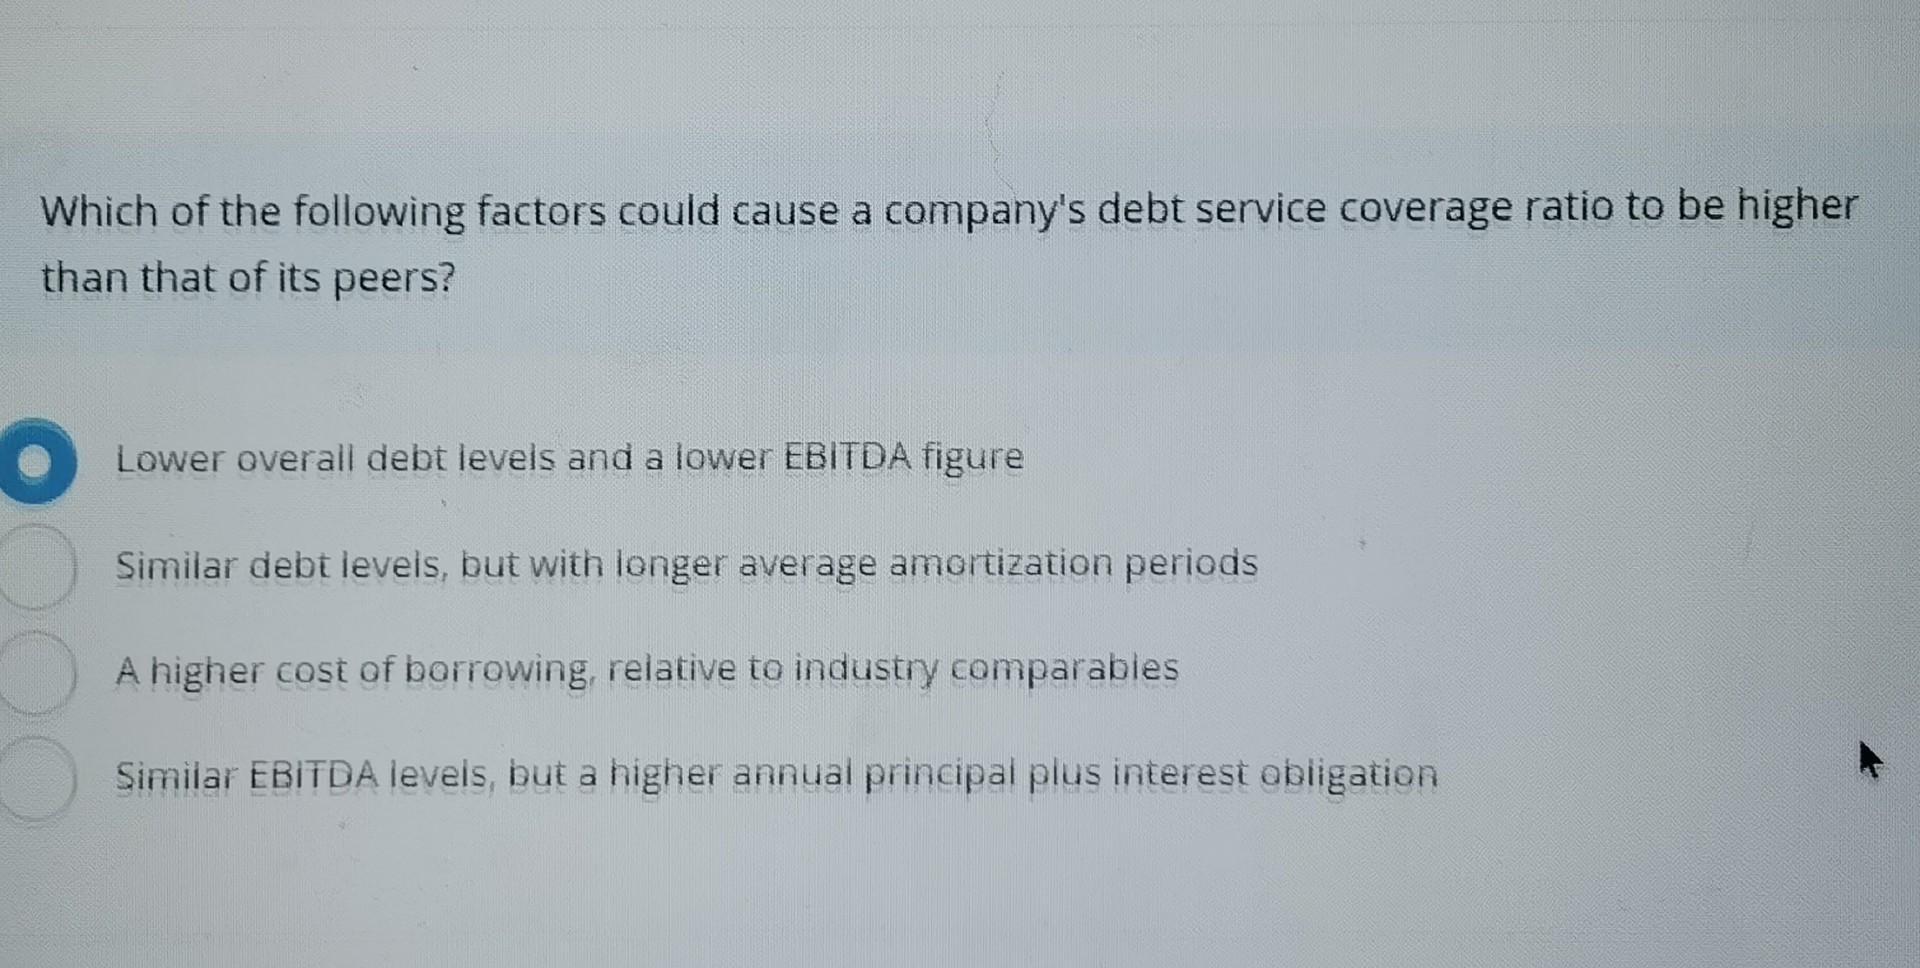 Which of the following factors could cause a company's debt service coverage ratio to be higher than that of